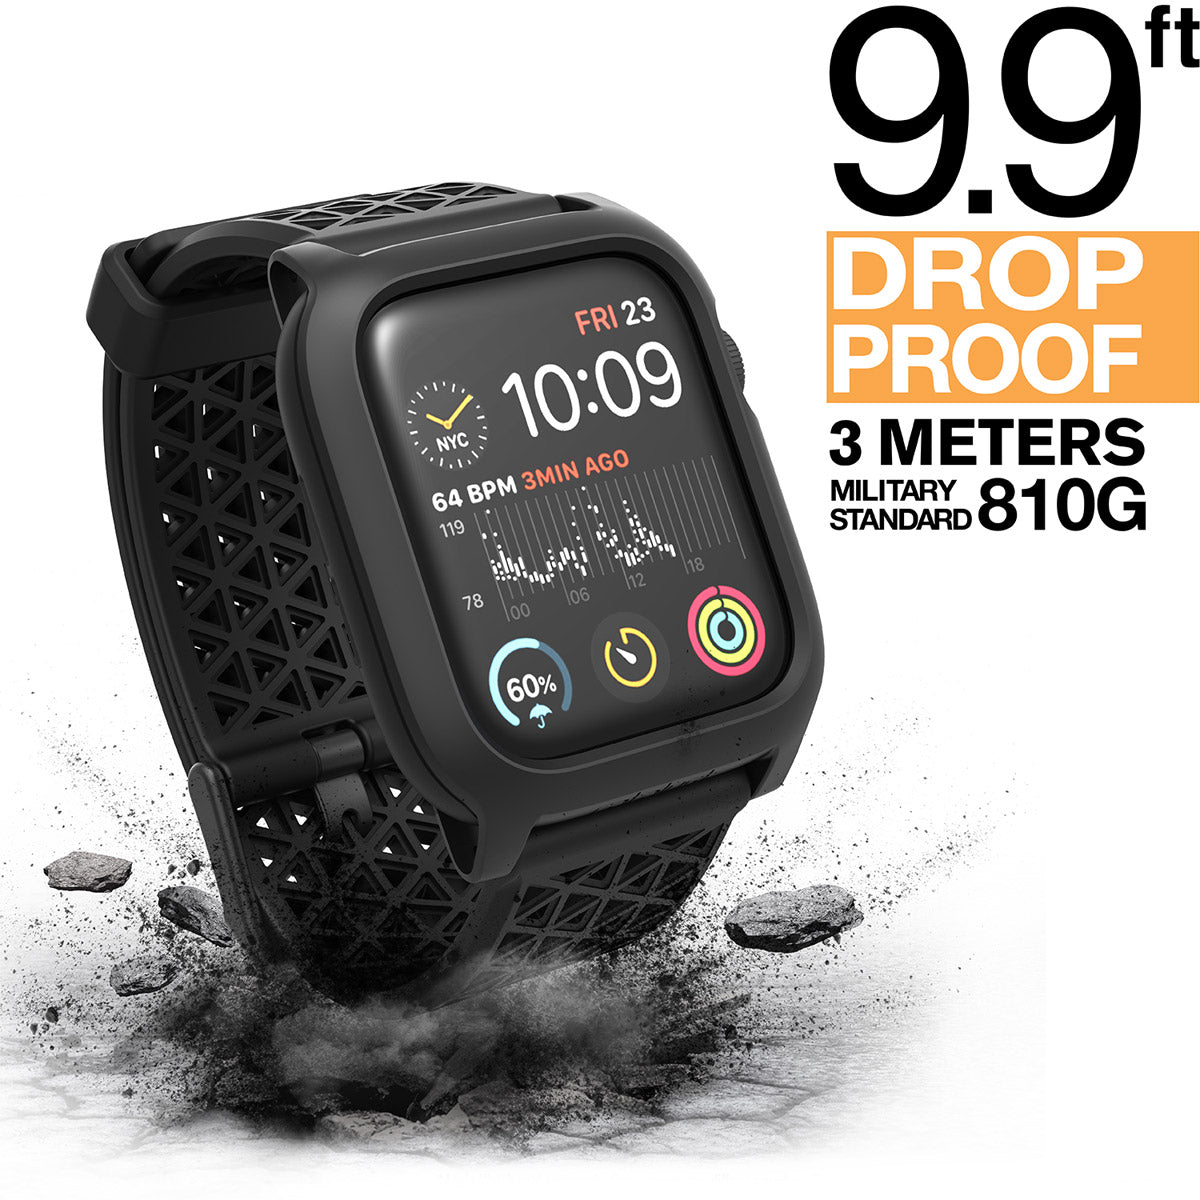 catalyst apple watch series 6 5 4 se gen 21 44mm 40mm impact protection case sport band showing an apple watch with a catalyst case and a cracked floor text reads 9.9ft drop proof 3 meters military standard 810g